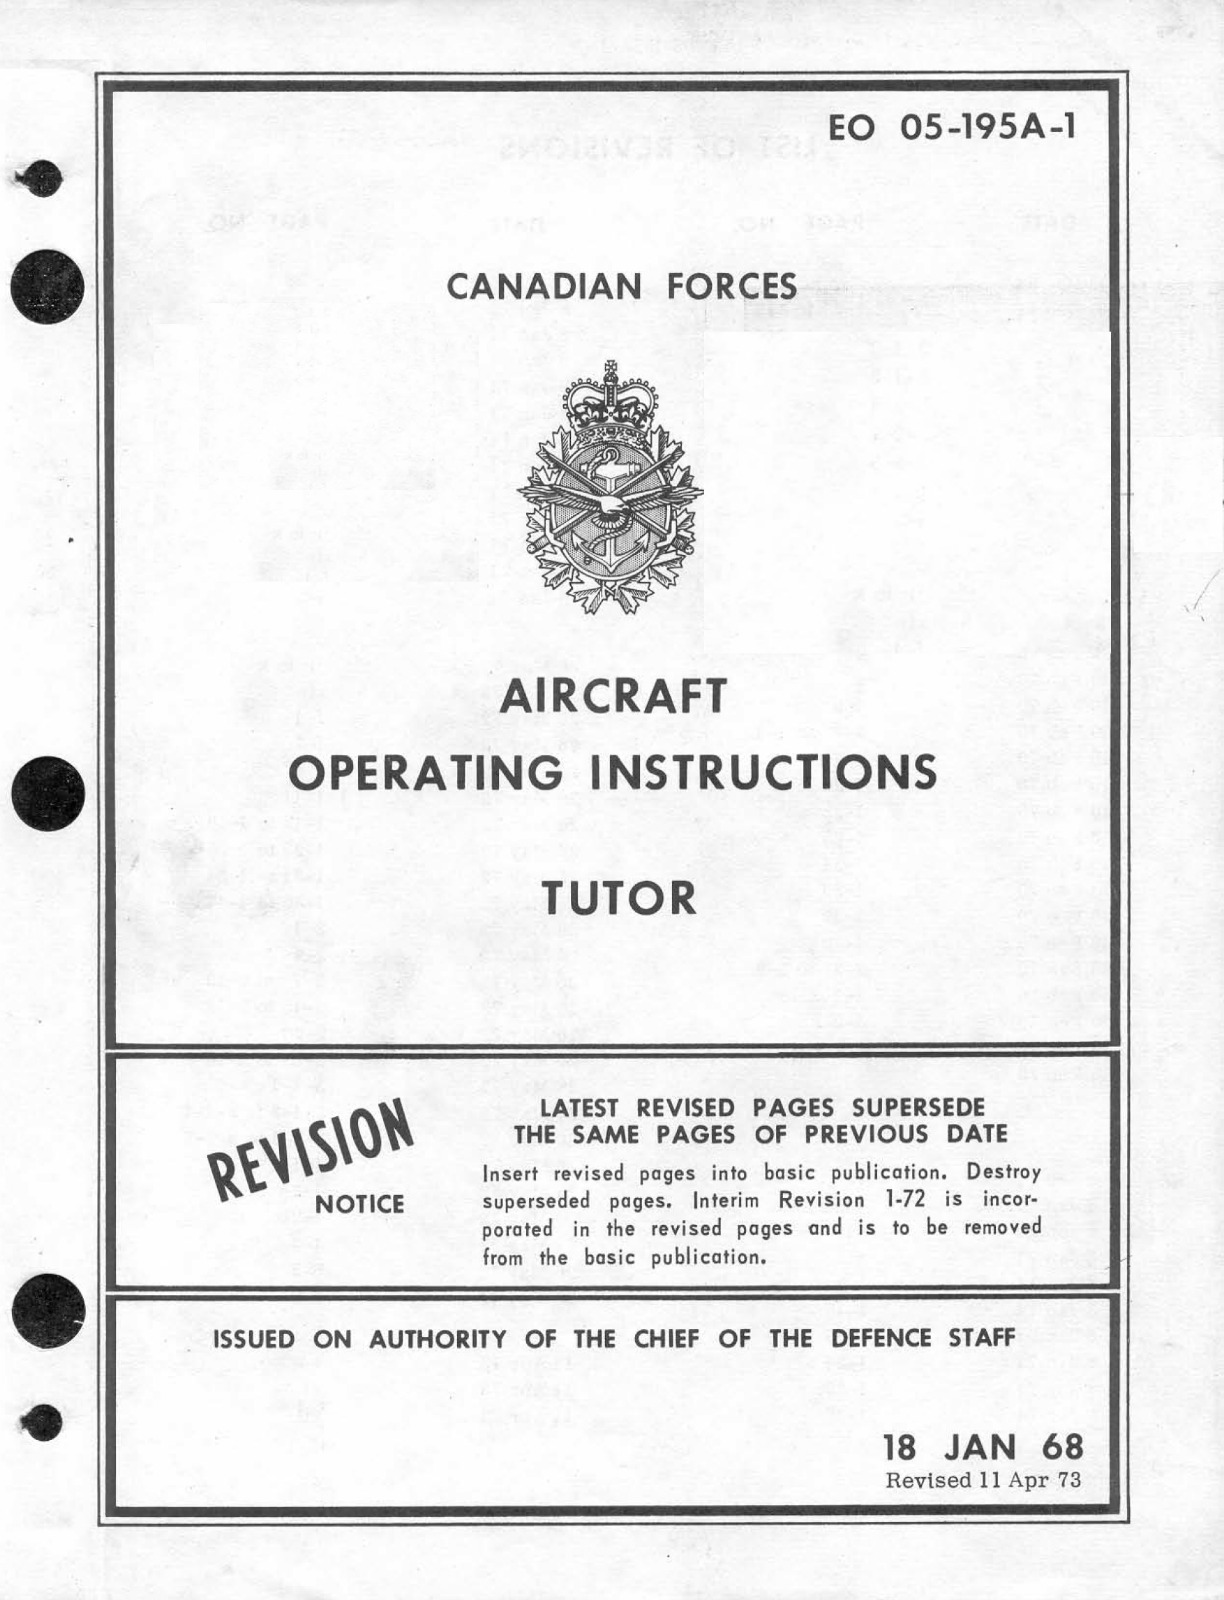 147 Page CAF Canadair CL-41 CT-114 Tutor T-33 Shooting Star Flight Manual on CD